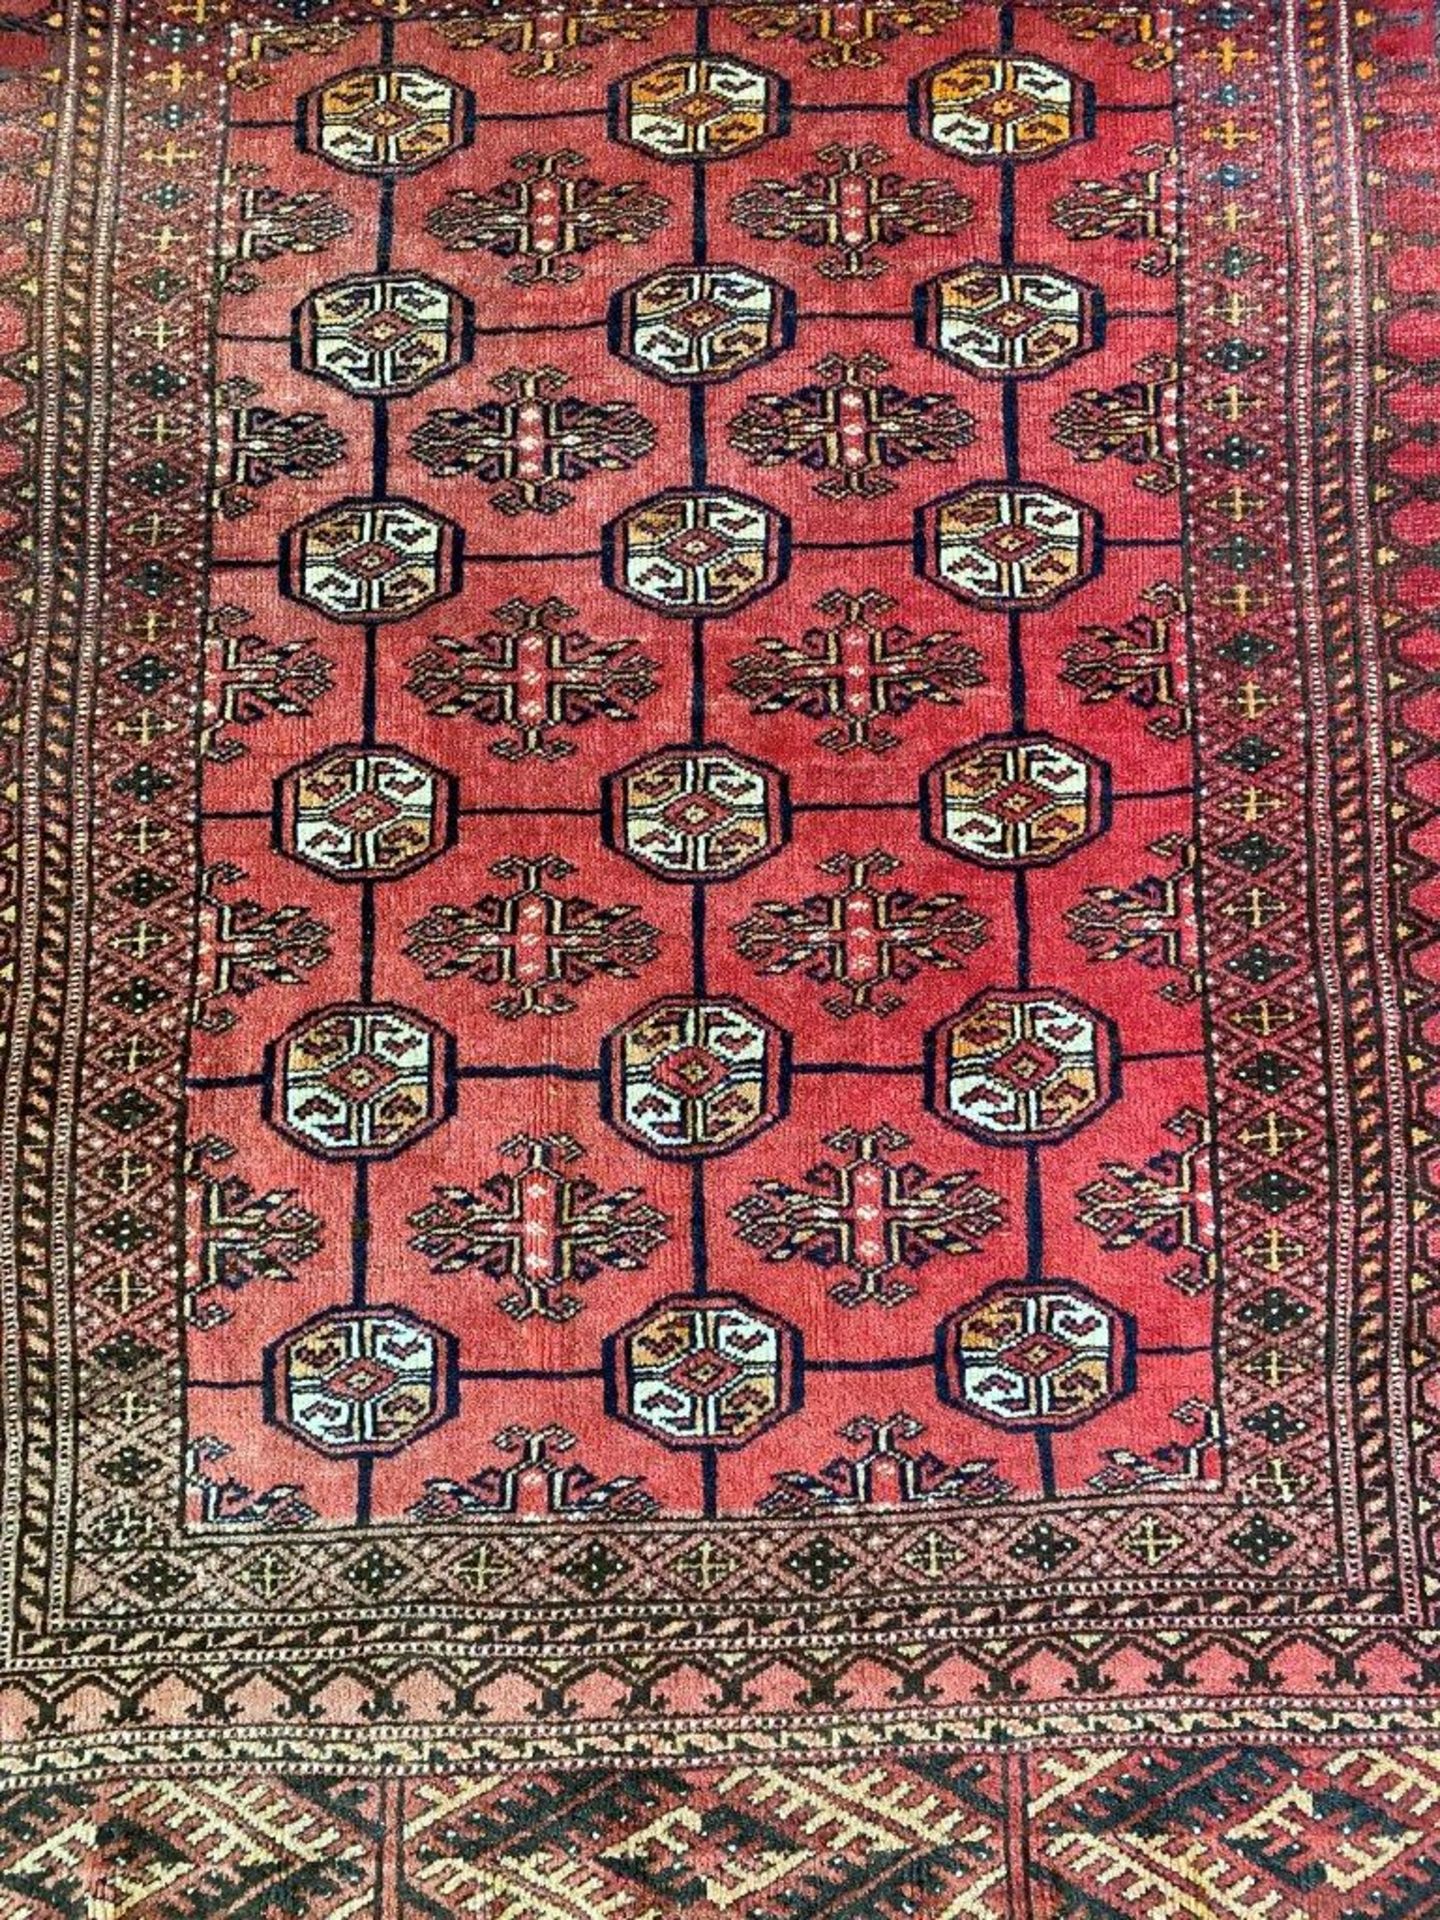 Red ground wool rug - Image 3 of 3